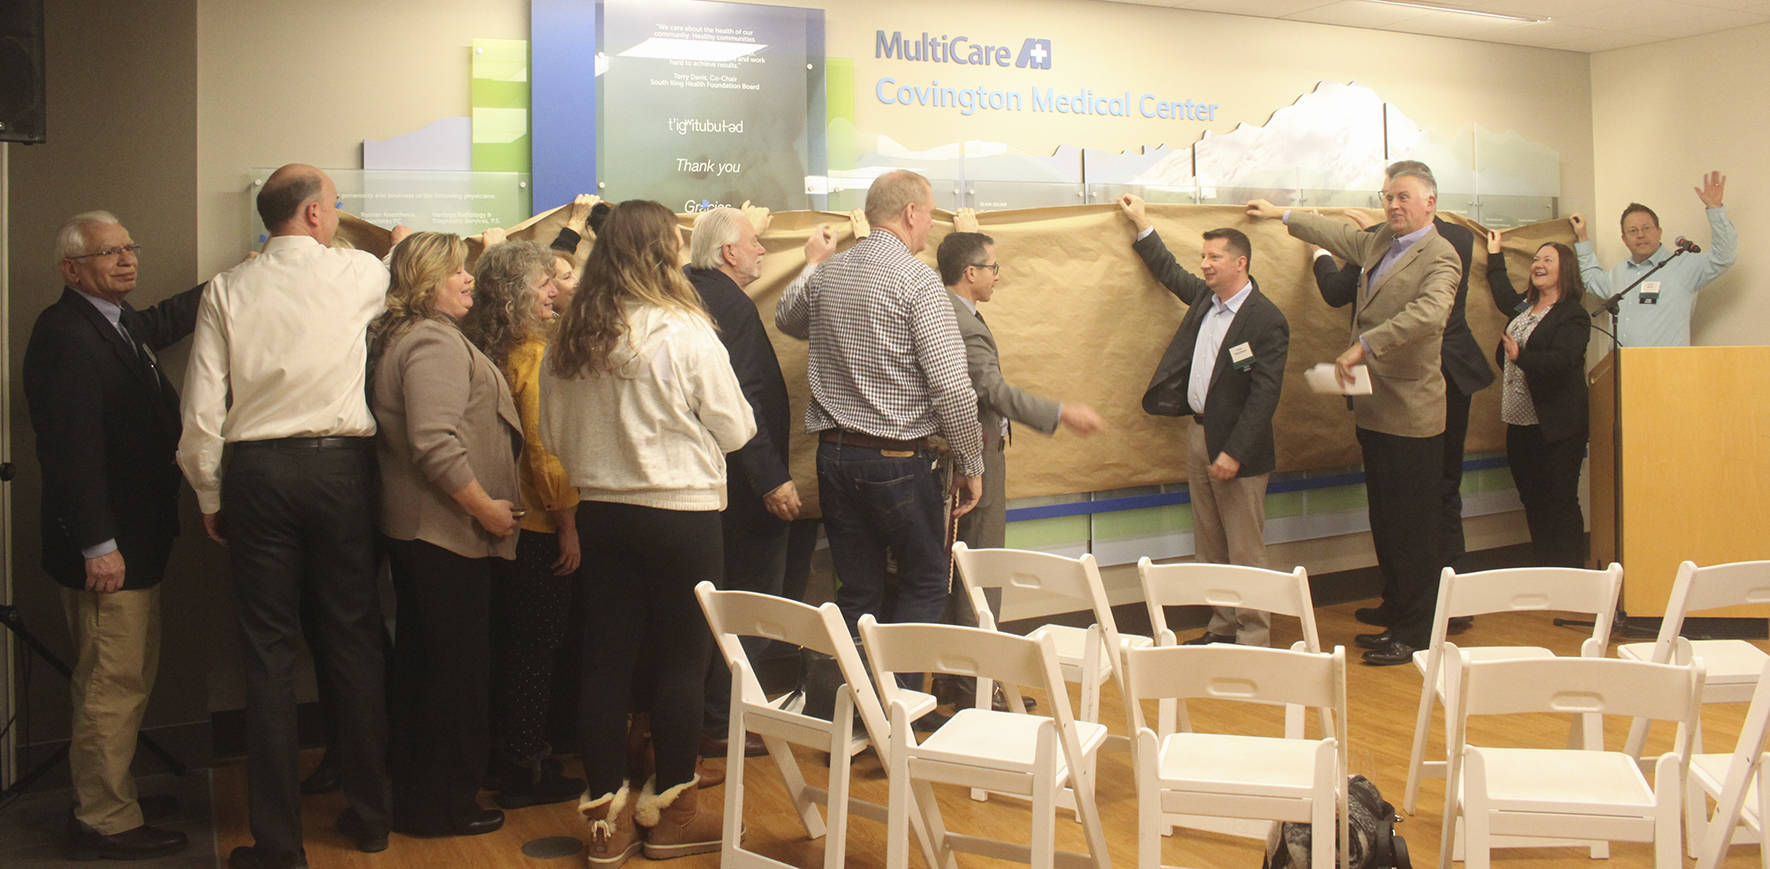 Multicare staff members and others gathered on Feb. 26 to celebrate the unveiling of the new donor wall that honors those who have donated to the South King Health Foundation campaign, which funded a reflection room for Covington MultiCare.